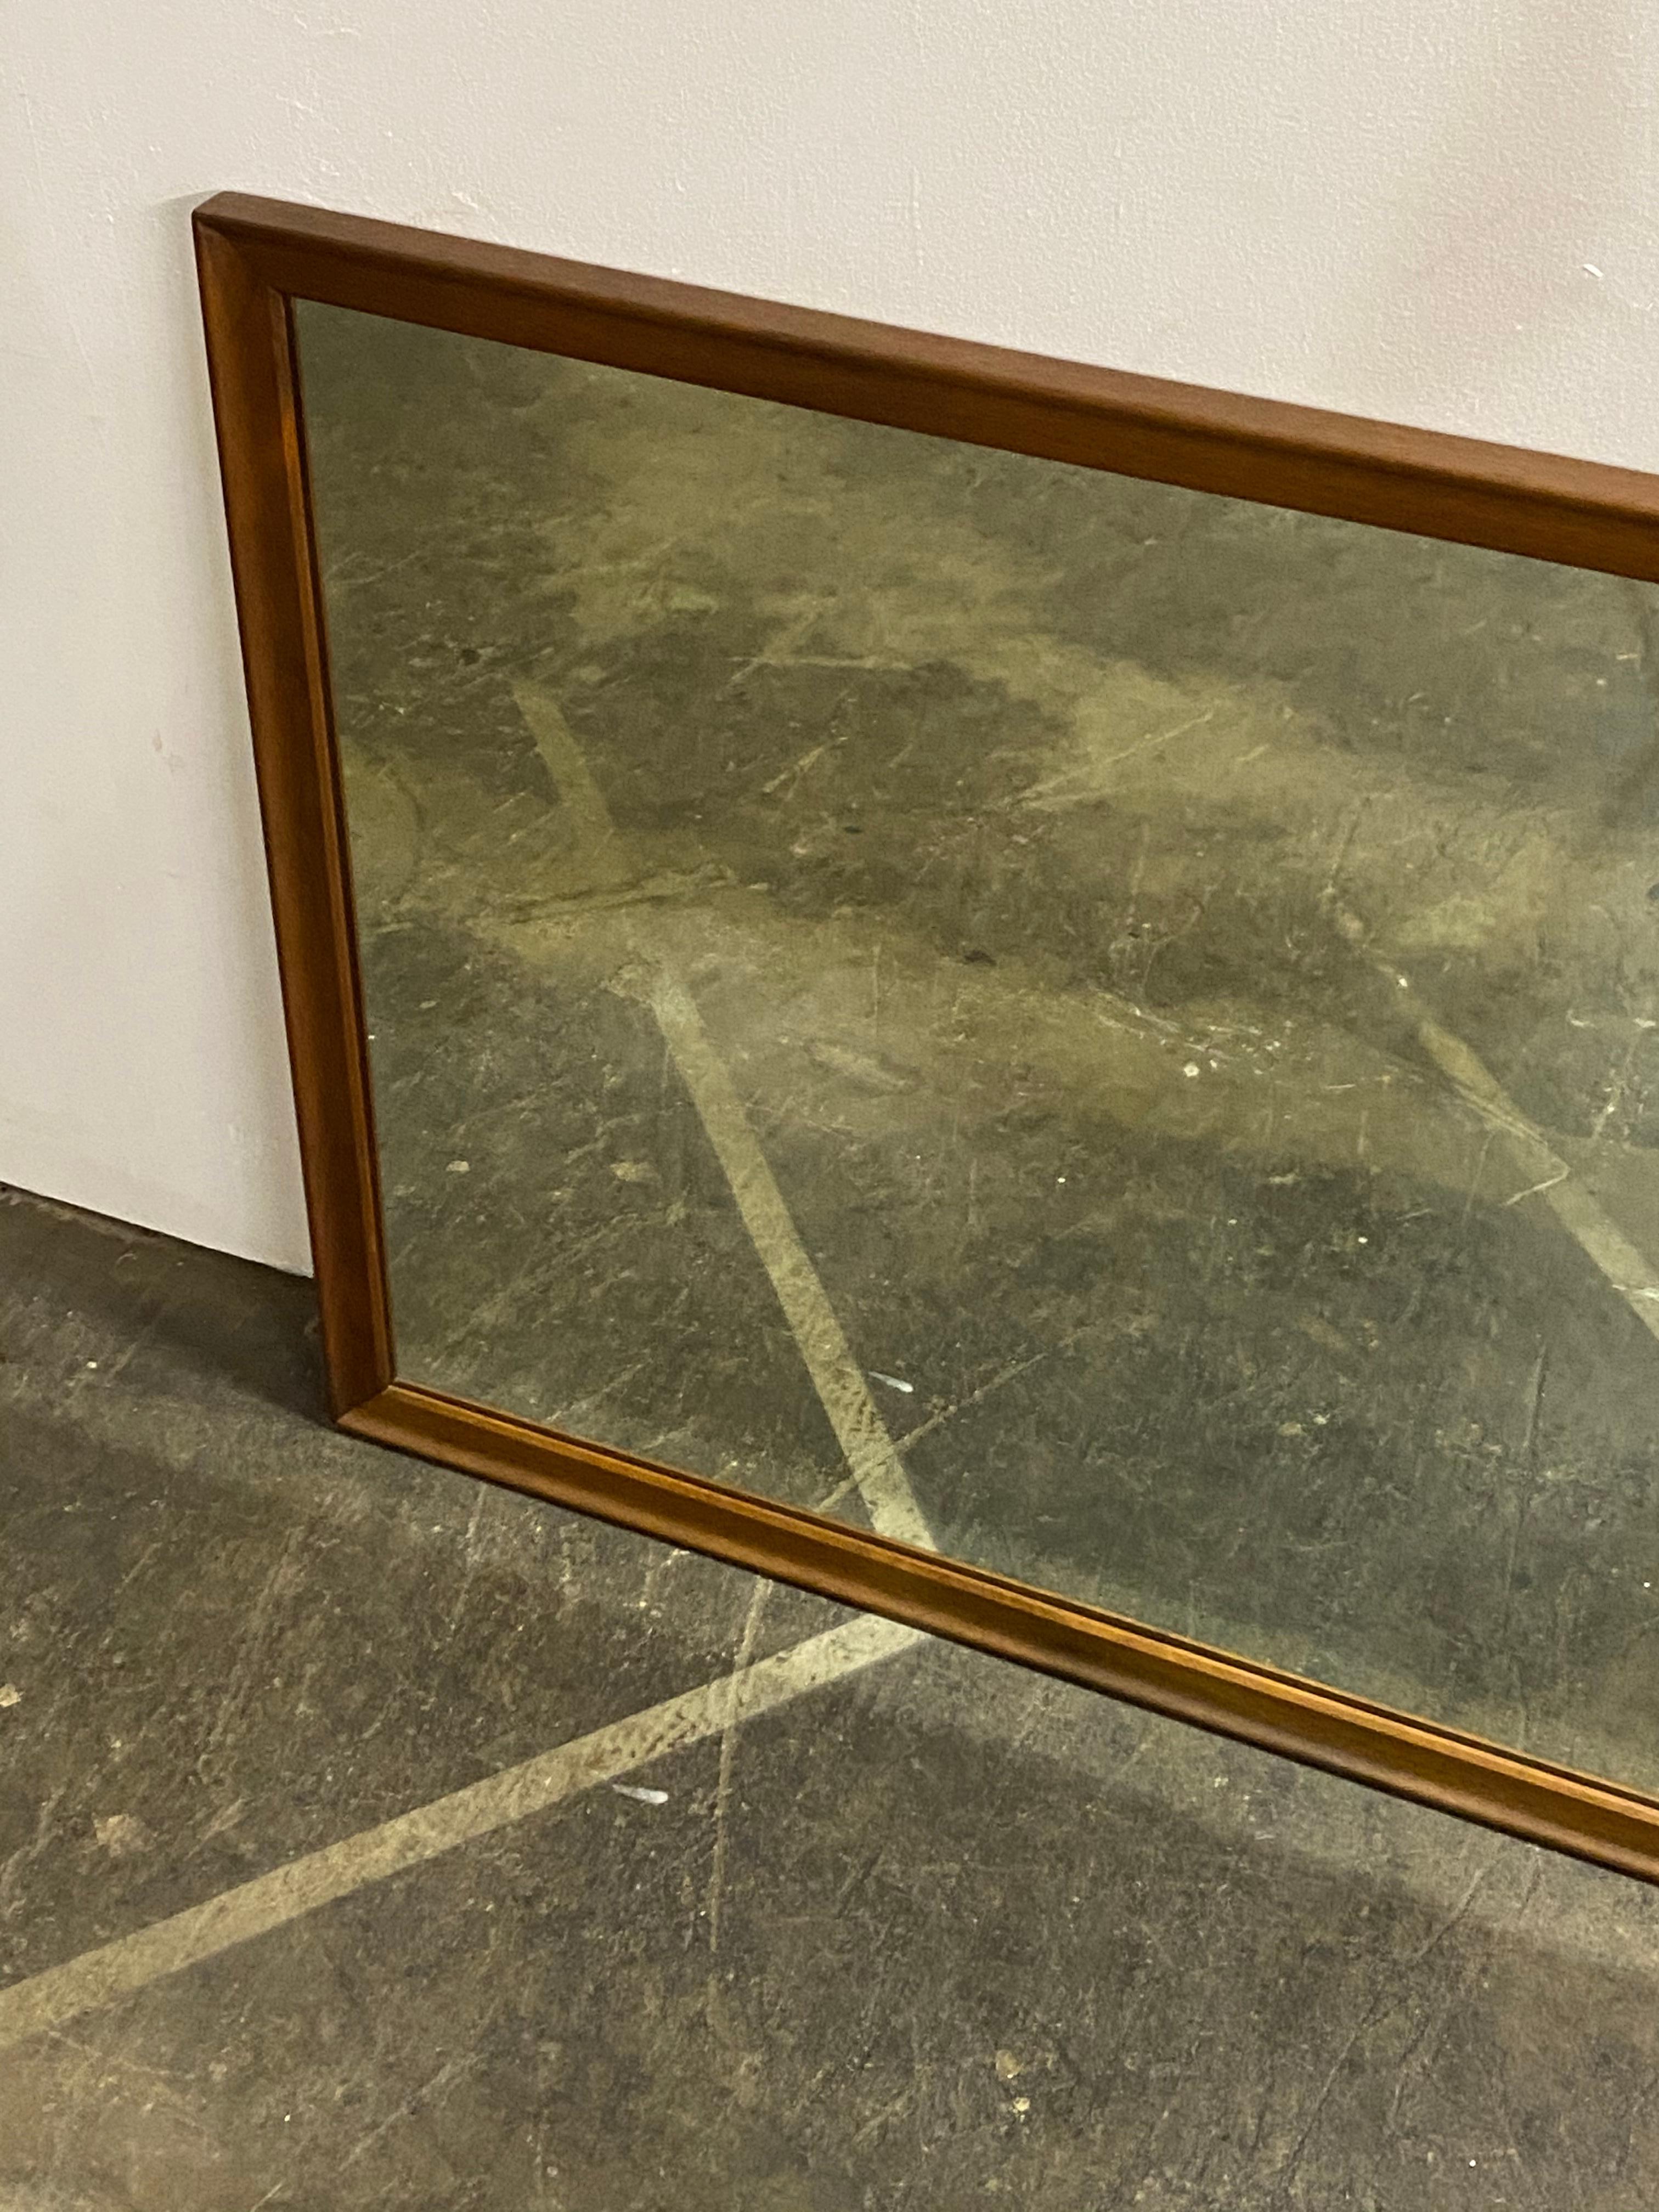 Elegant walnut rectangular mirror by Drexel. Designed by Kipp Stewart. Even warm walnut tones outline the large surface mirror. Substantial yet understated. Solid and sturdy and ready to hang.